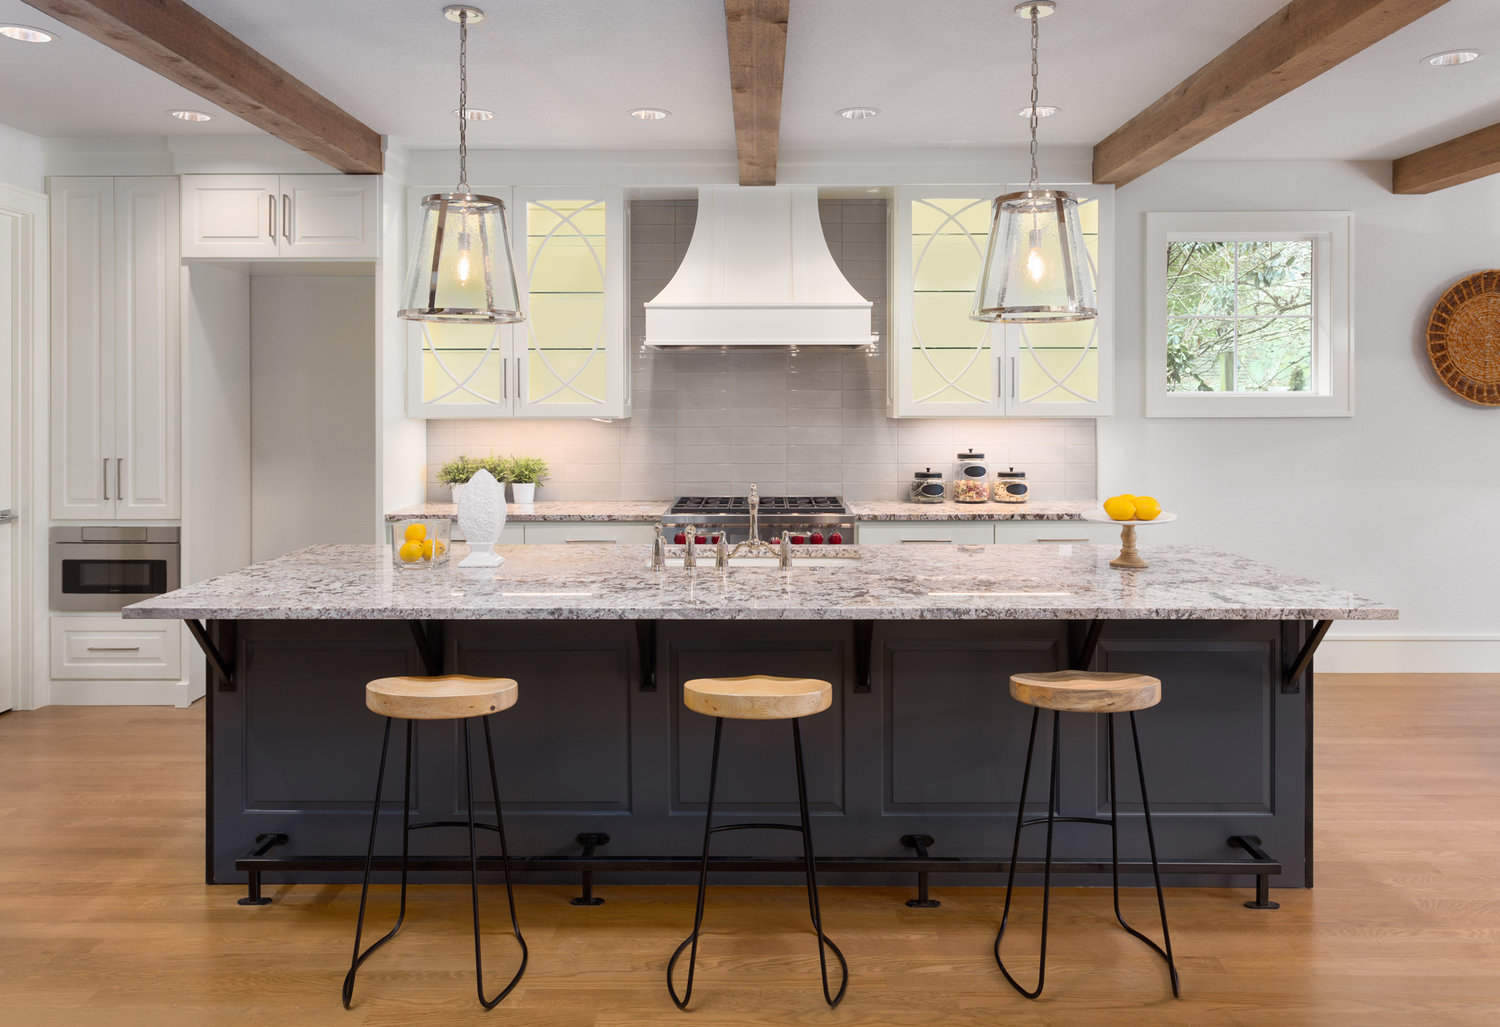 Why are quartz surfaces ideal for the kitchen?